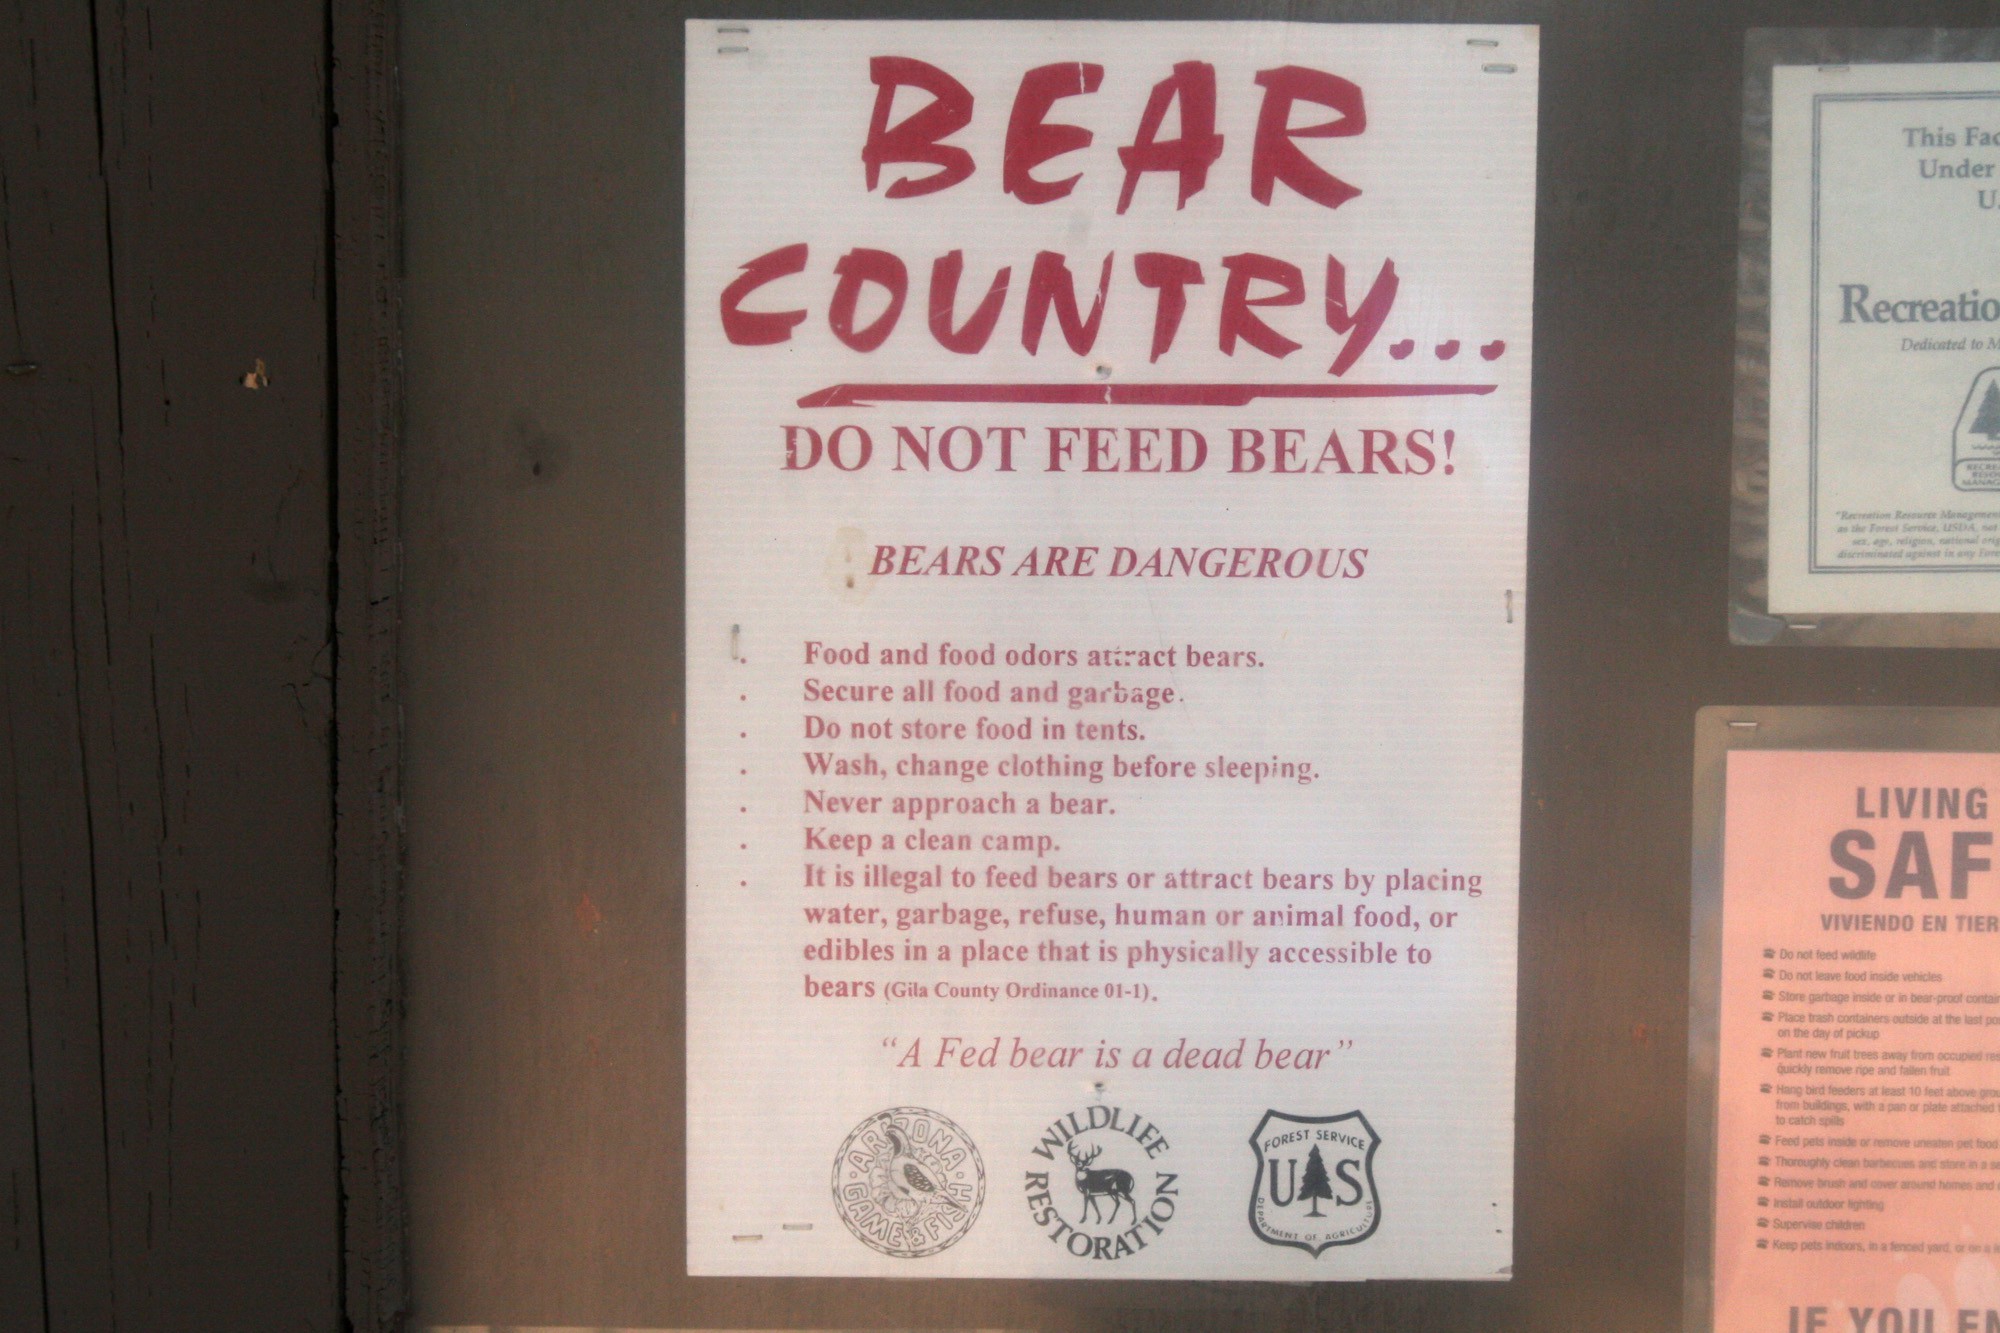 A Bear Aware campaign by the U.S. Forest Service and the Arizona Game and Fish Department alerts campers to ways they can help minimize the chance of attracting bears.